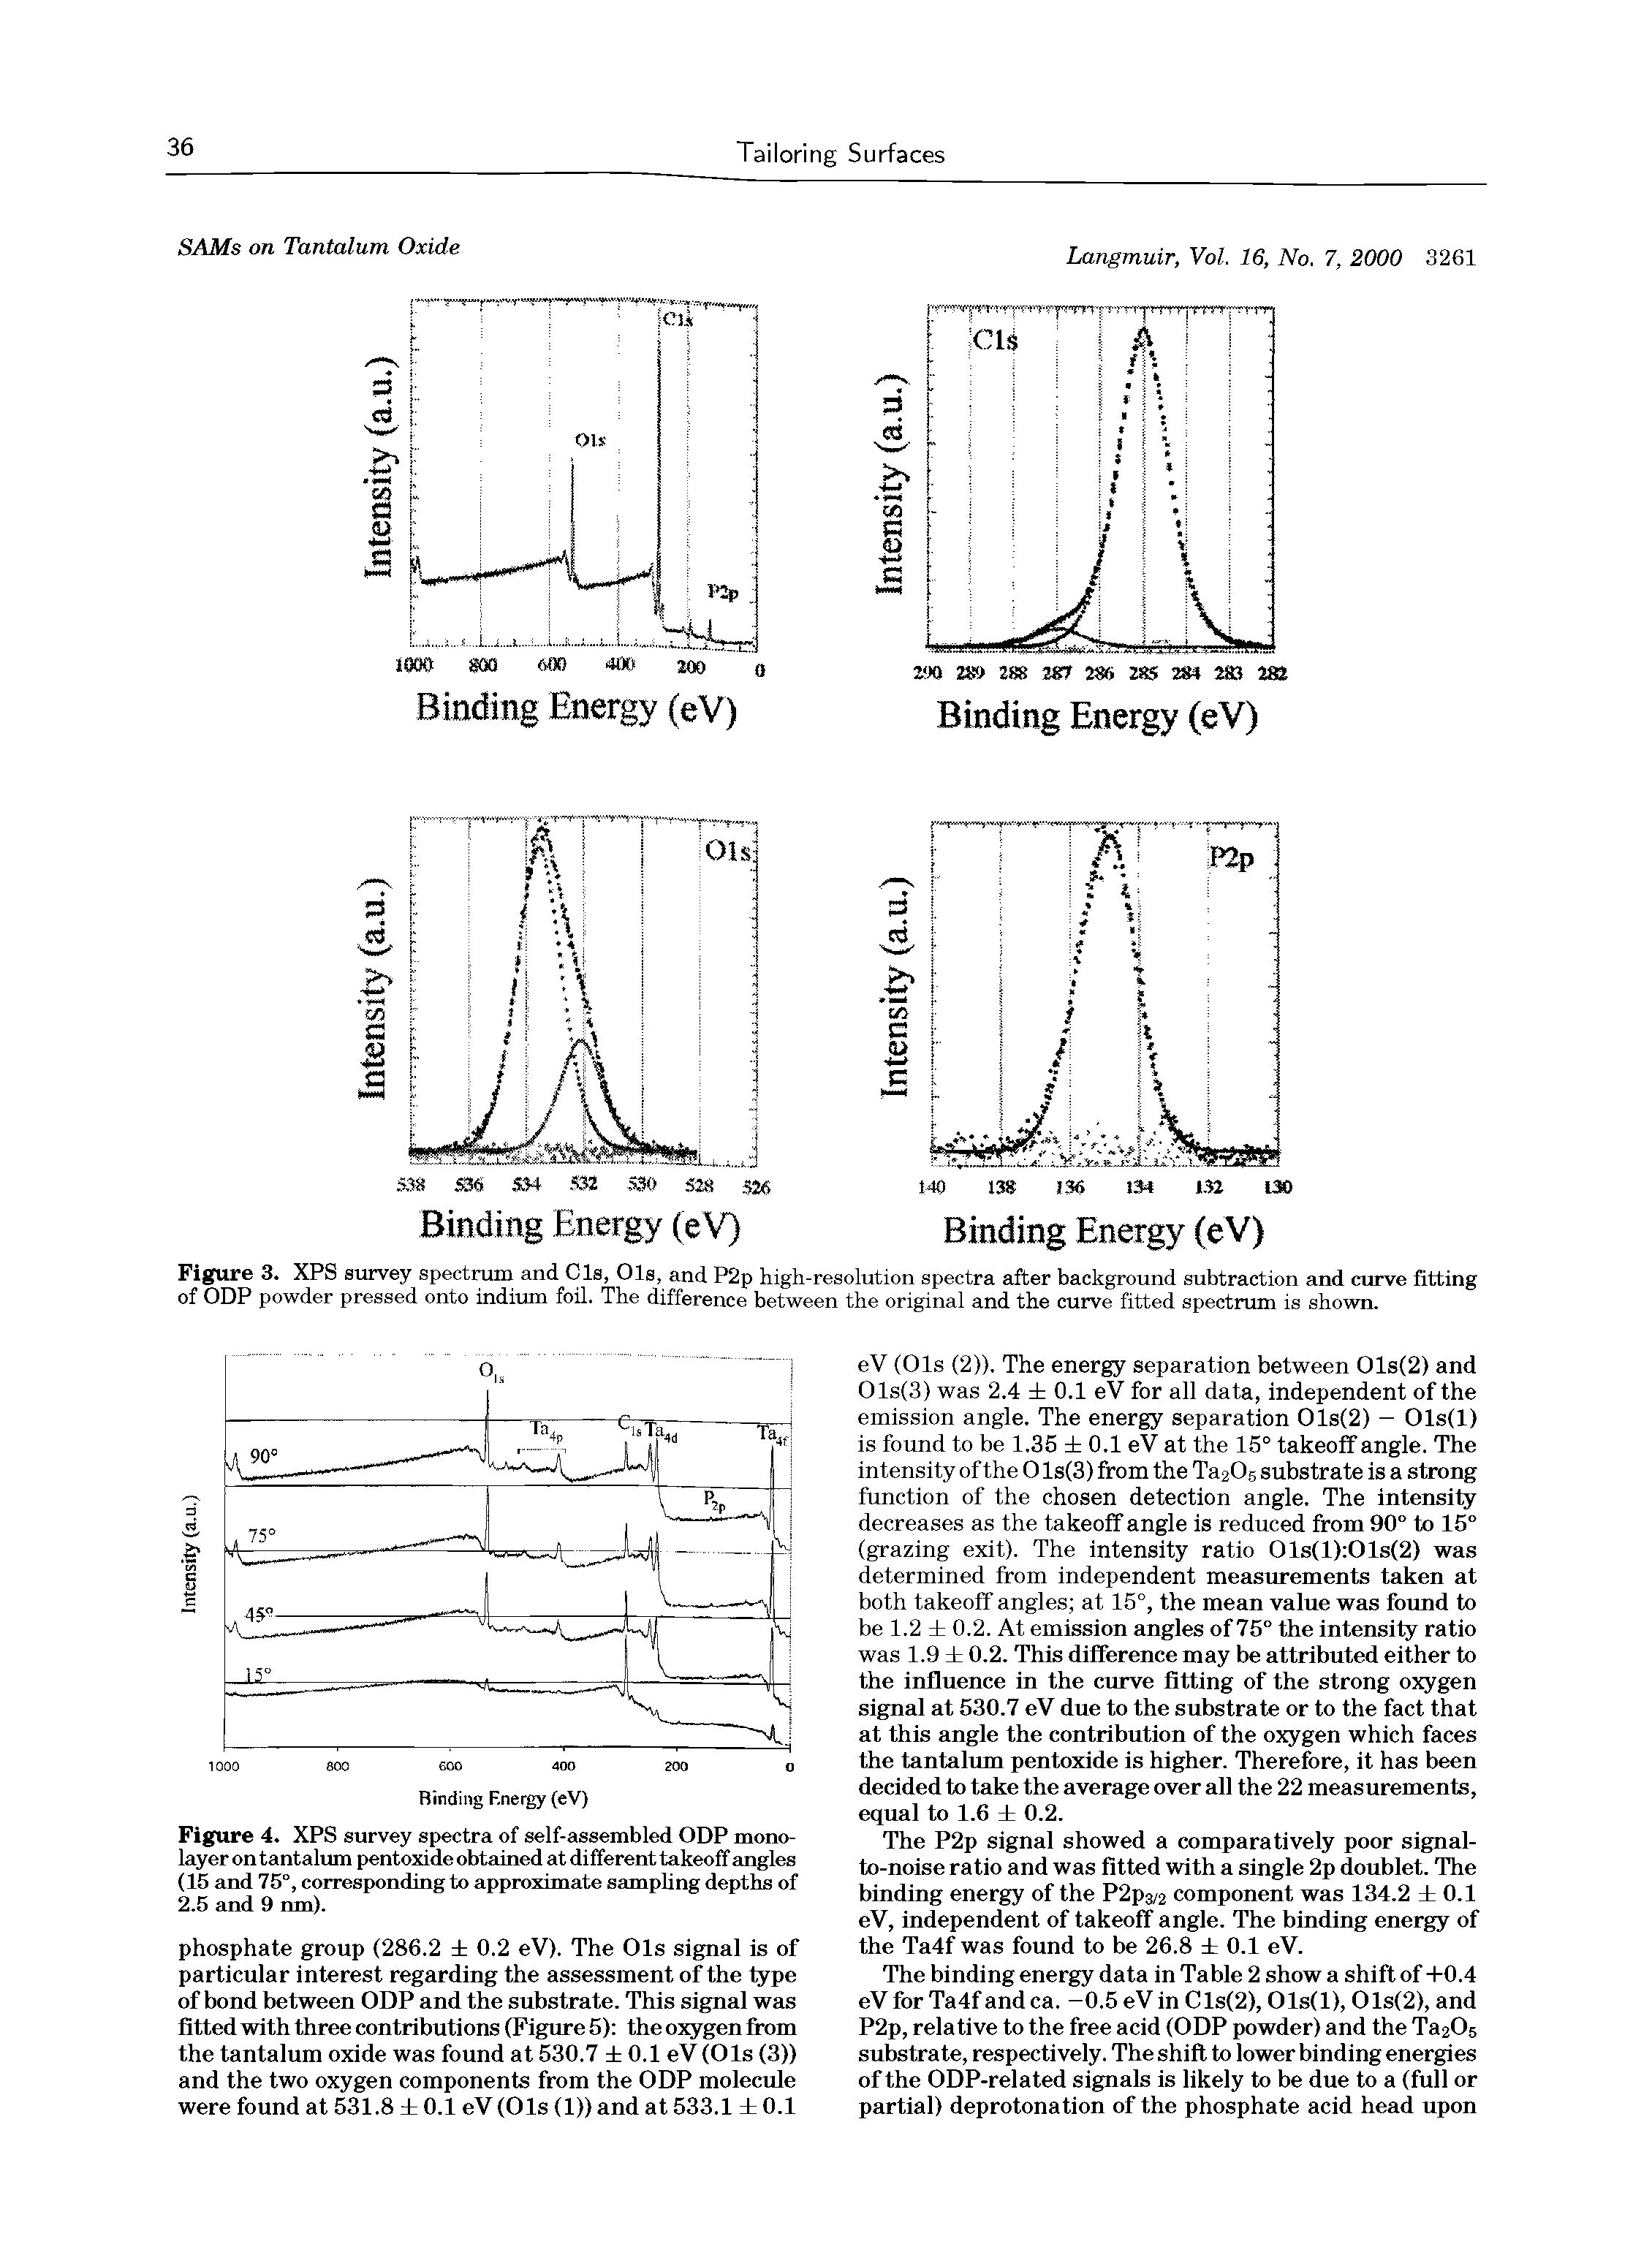 Figure 3. XPS survey spectrum and Cls, Ols, and P2p high-resolution spectra after background subtraction and curve fitting of OOP powder pressed onto indium foil. The difference between the original and the curve fitted spectrum is shown.